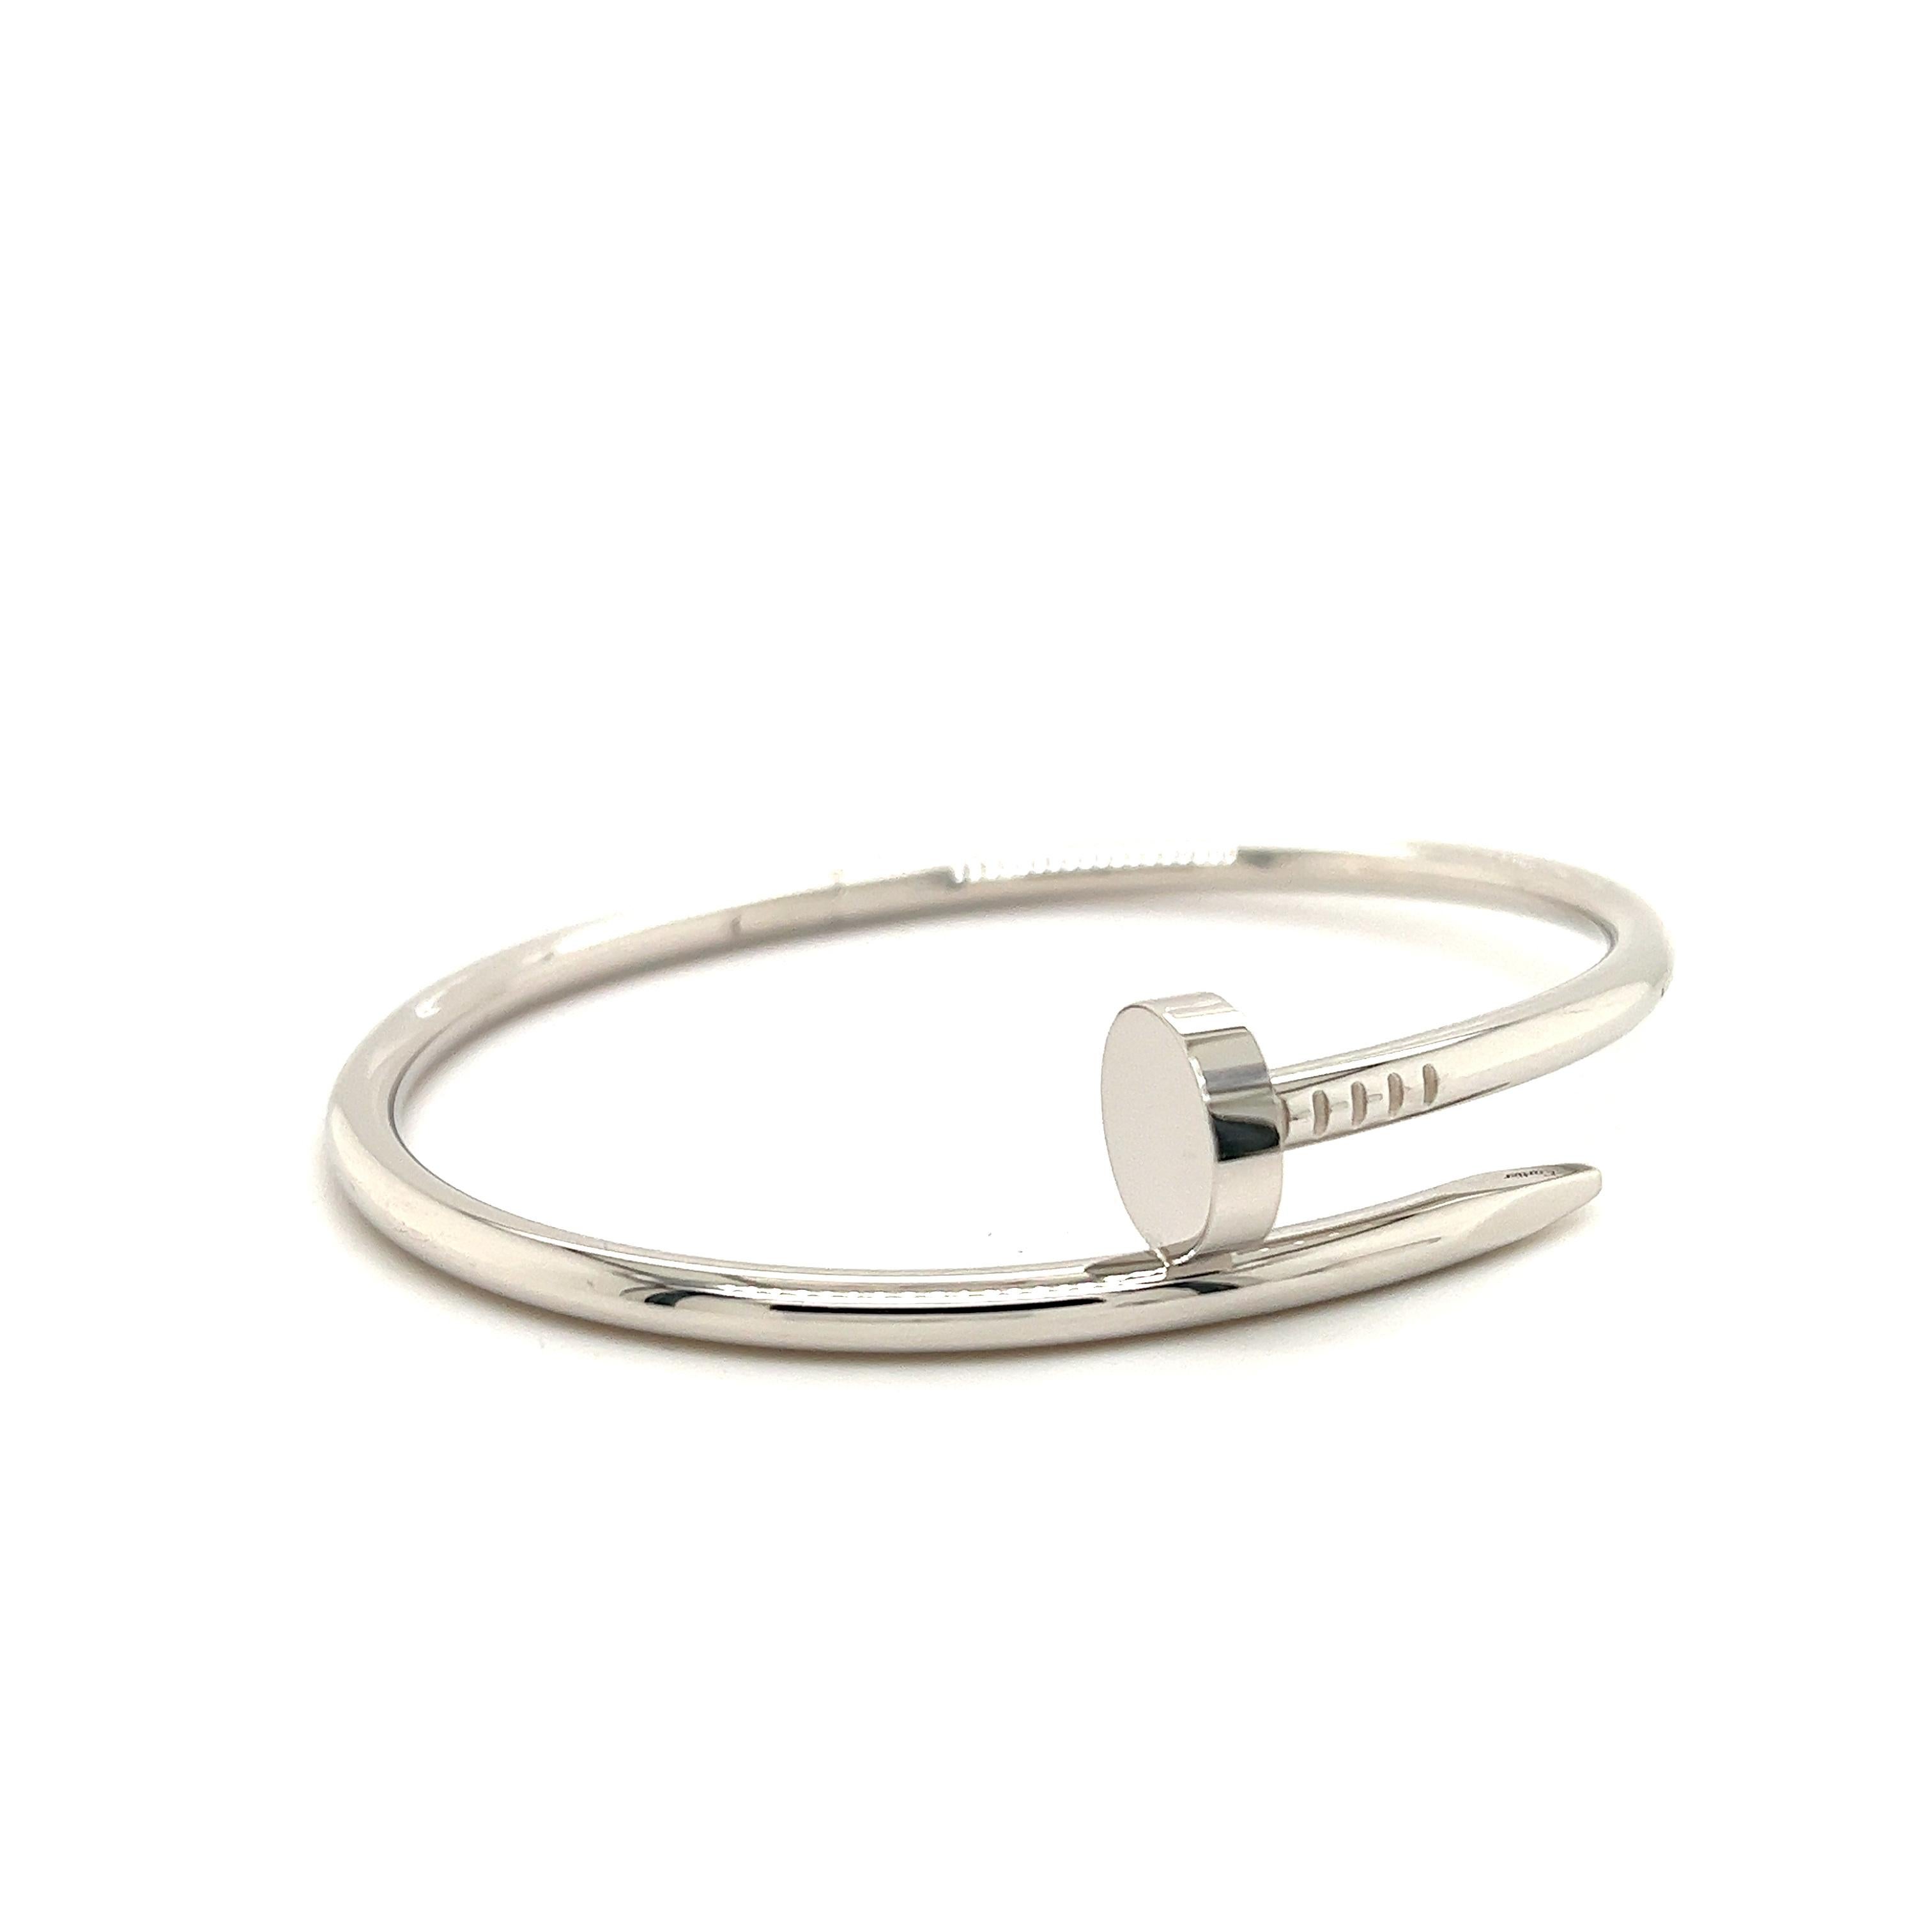 Iconic design from Cartier. This classic Juste Un Clou bracelet is crafted in 18k white gold with a rhodium-finish. The bracelet is a size 18 and has a 3.5 mm width. The bracelet is NEW as it was purchased on June 11, 2022. The bracelet retails for